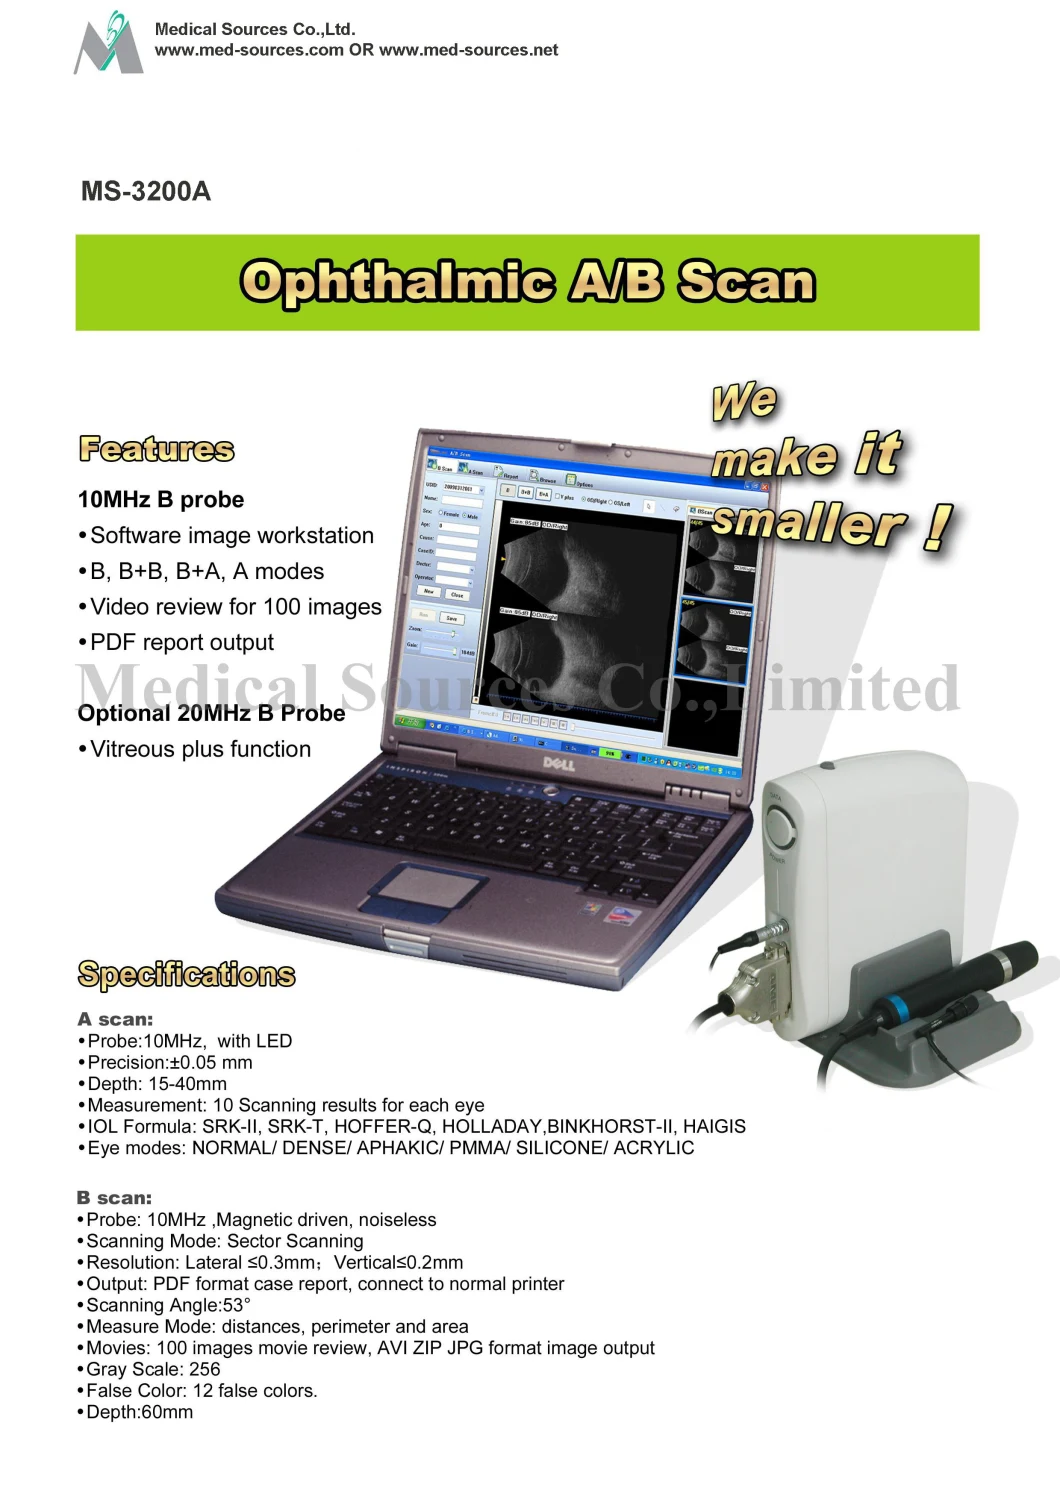 Ms-3200A a/B Biometer Phachymeter Ophthalmic Ophthalmology Ultrasound Scanner Scan